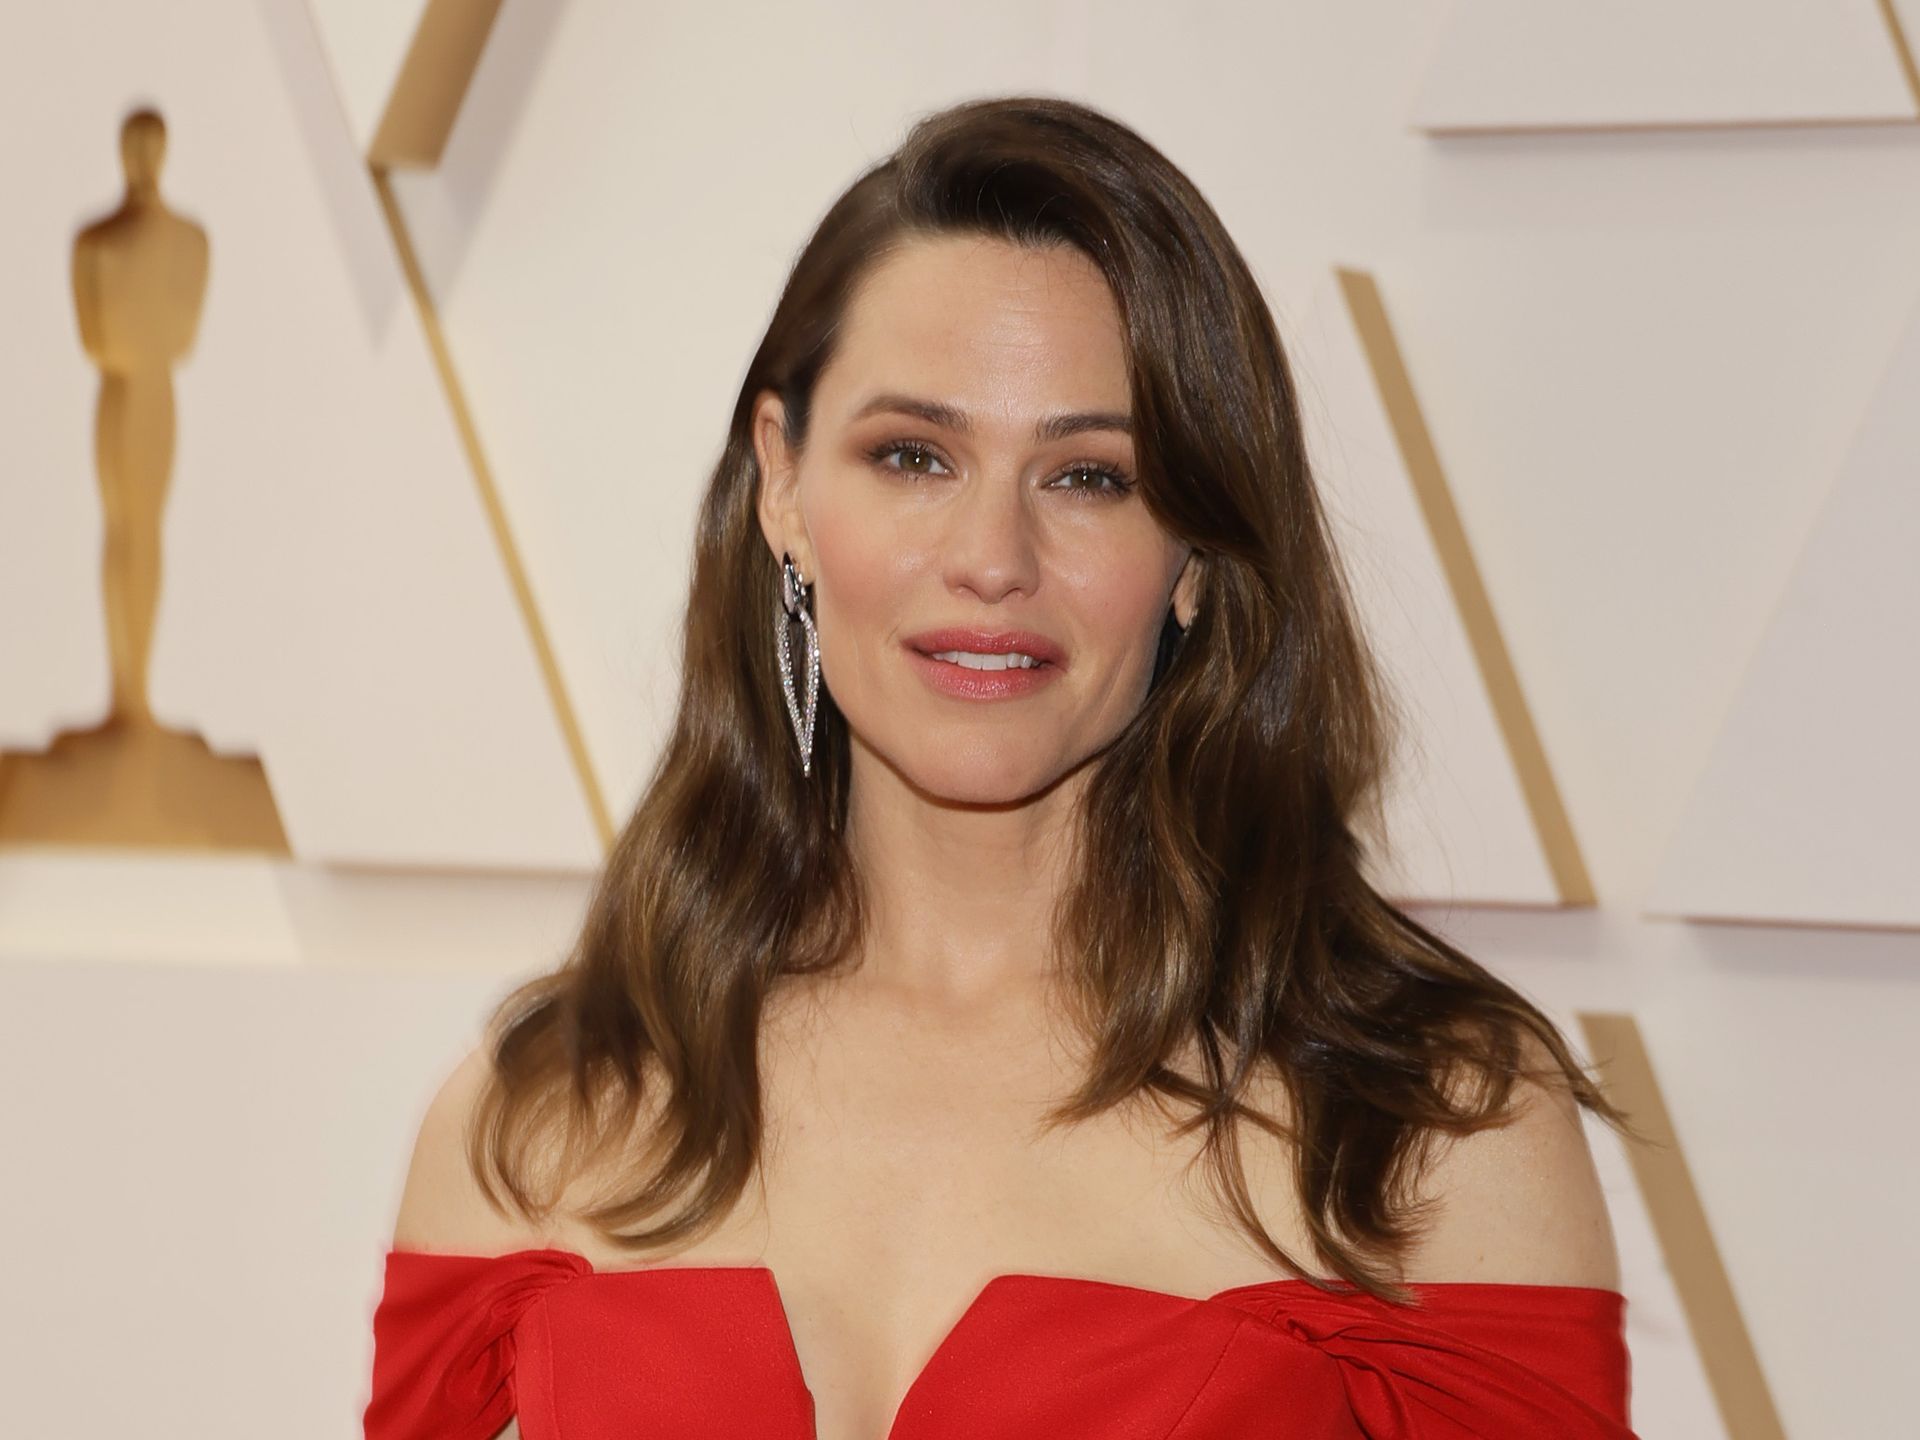 Jennifer Garner Is Flirty and Thriving in a Red Minidress